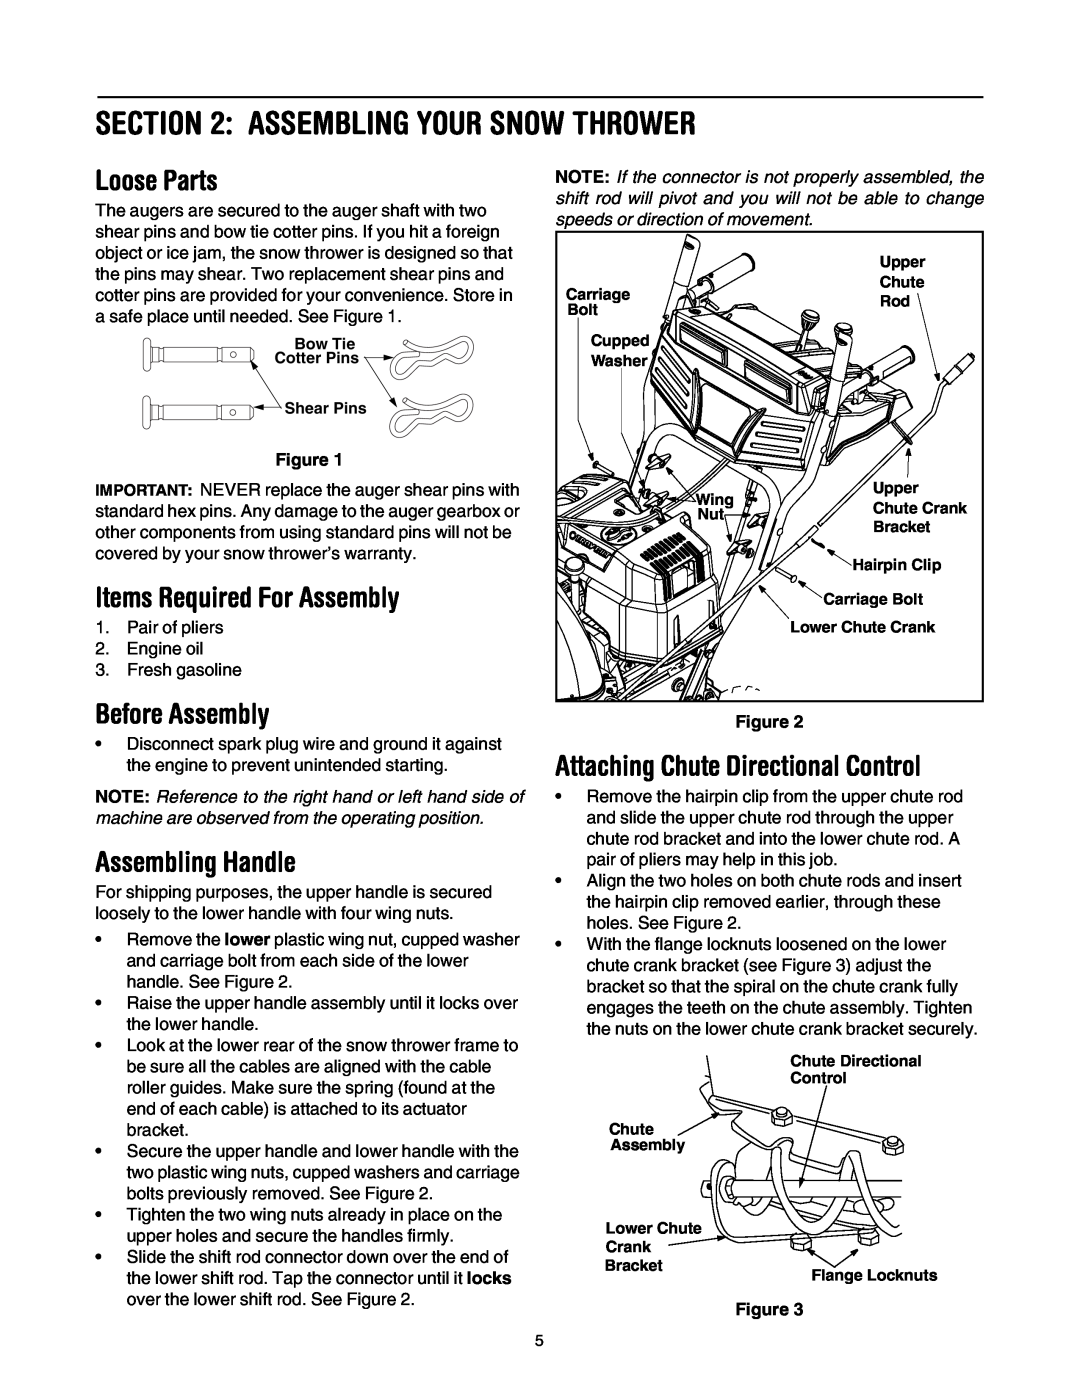 Troy-Bilt OEM-390-679 manual Assembling Your Snow Thrower, Loose Parts, Items Required For Assembly, Before Assembly 